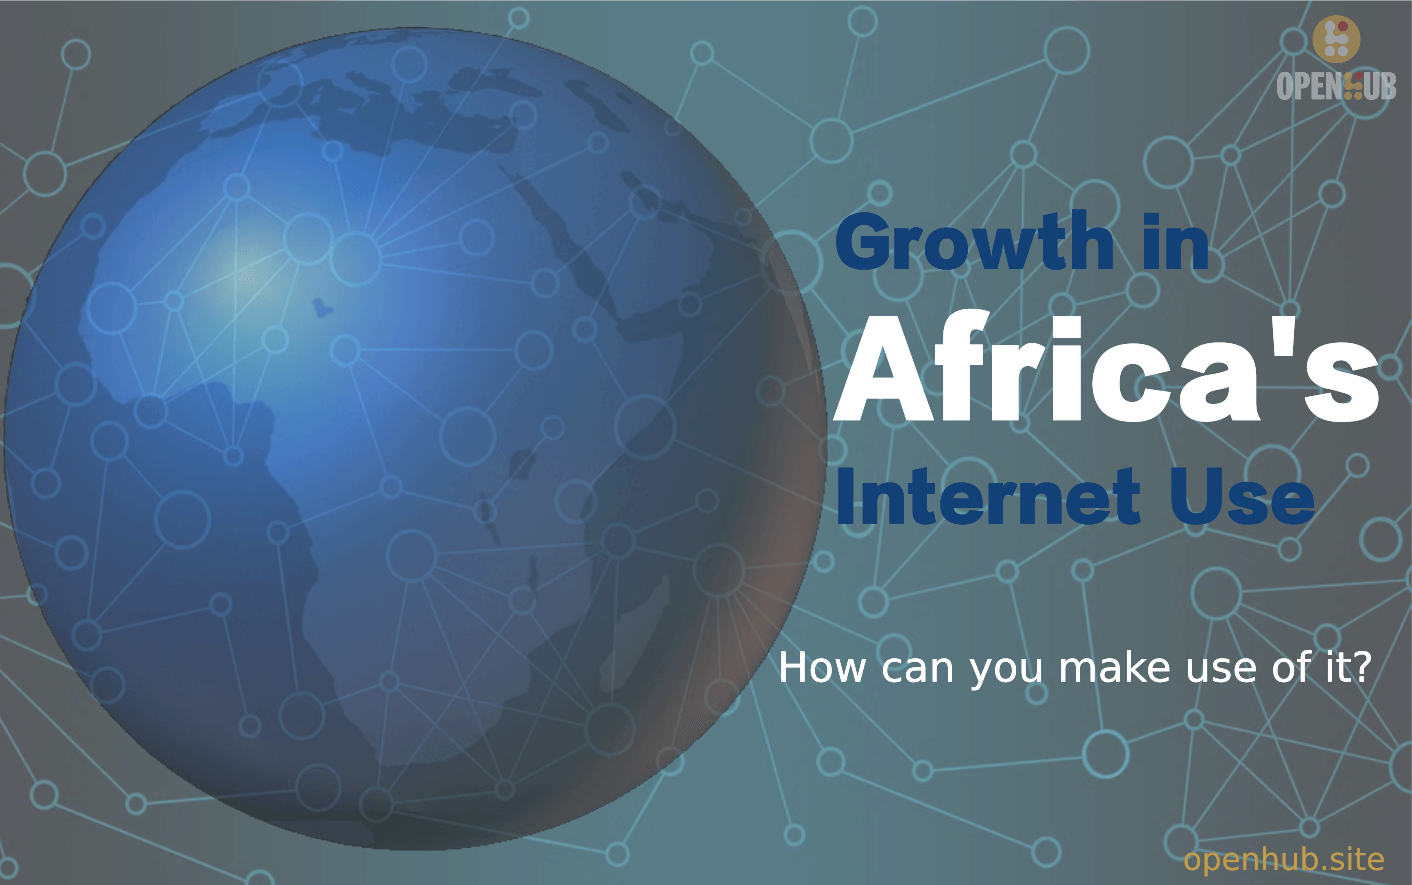 Internet Penetration Rate in Africa